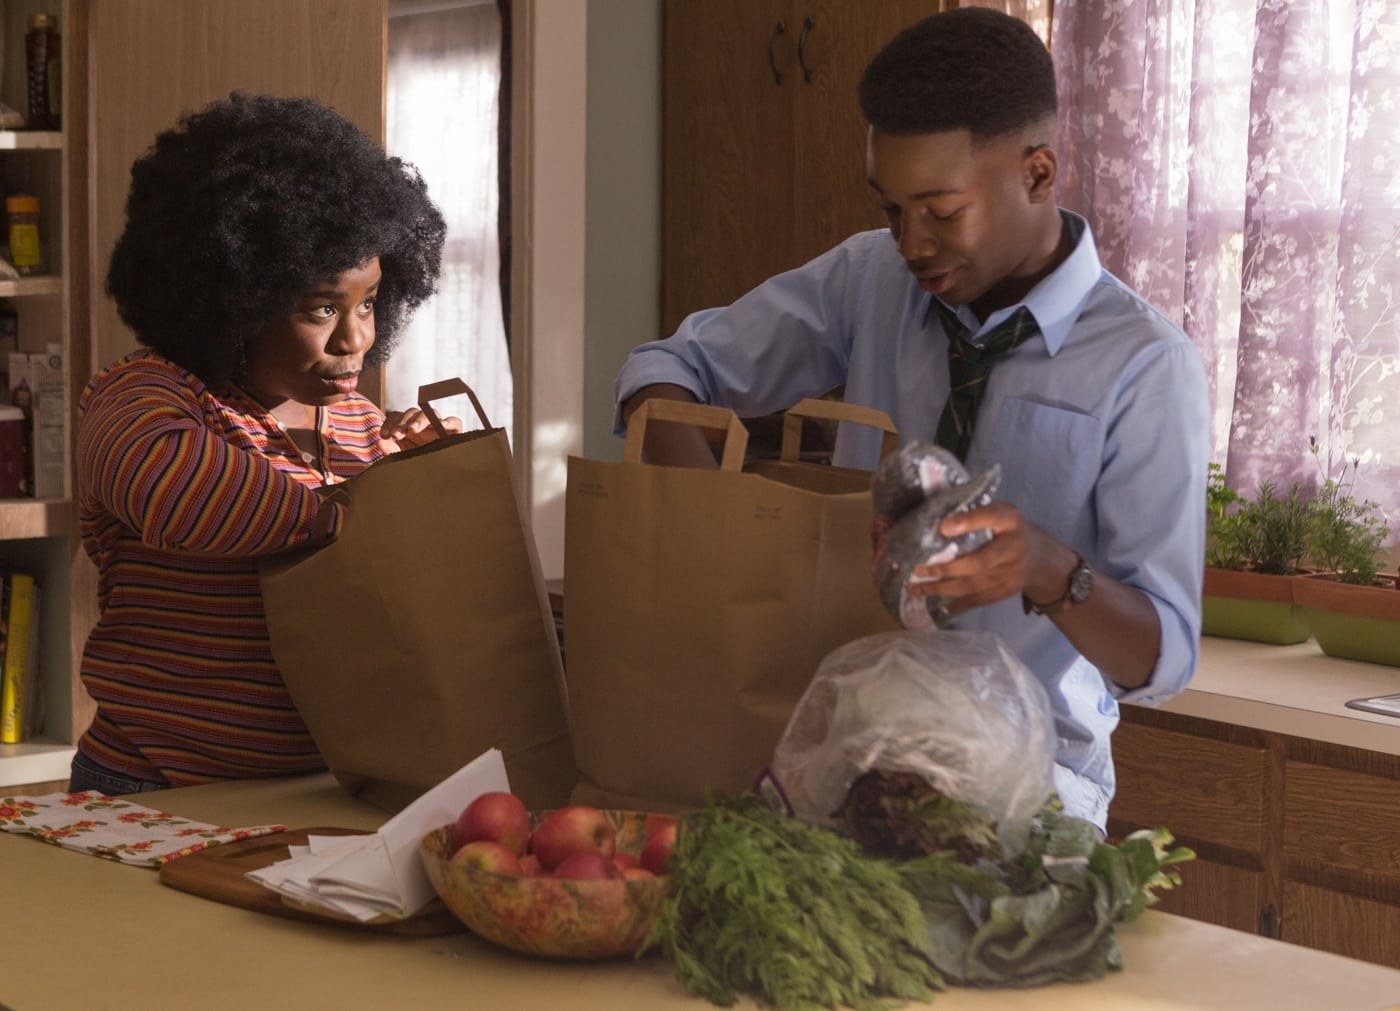 Uzo Aduba and Niles Fitch unpack groceries